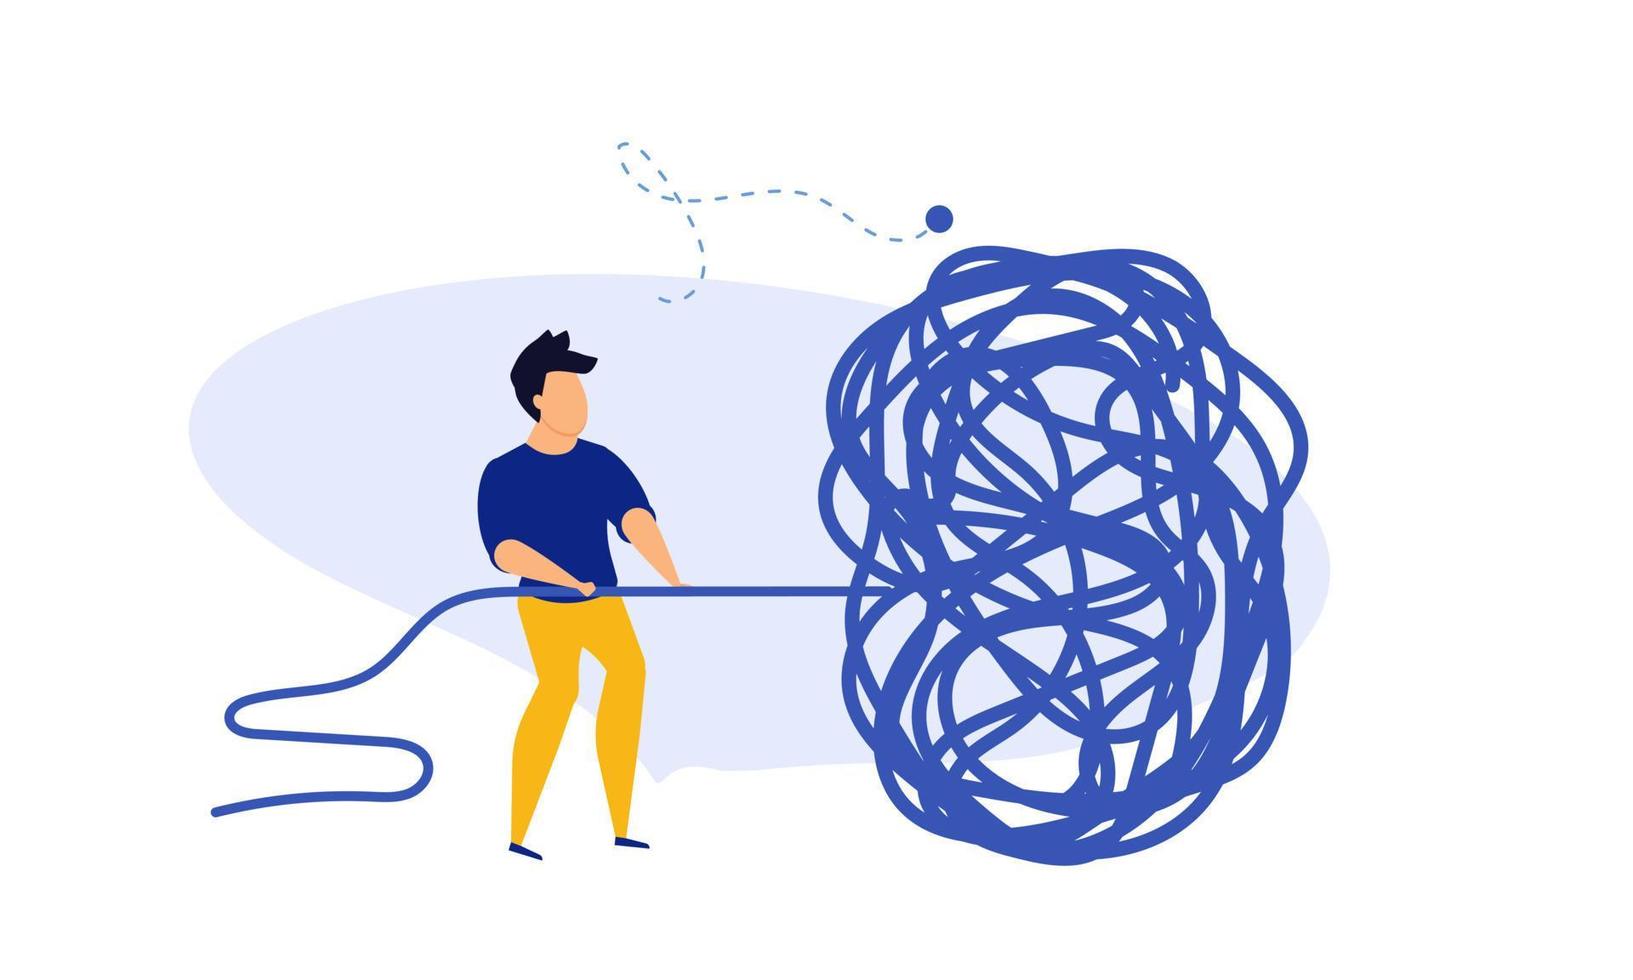 Business challenge vector achievement work progress. Tangle tangled conceptual abstract strategy teamwork people illustration. Solution clew ball career background. Searching motivation metaphor